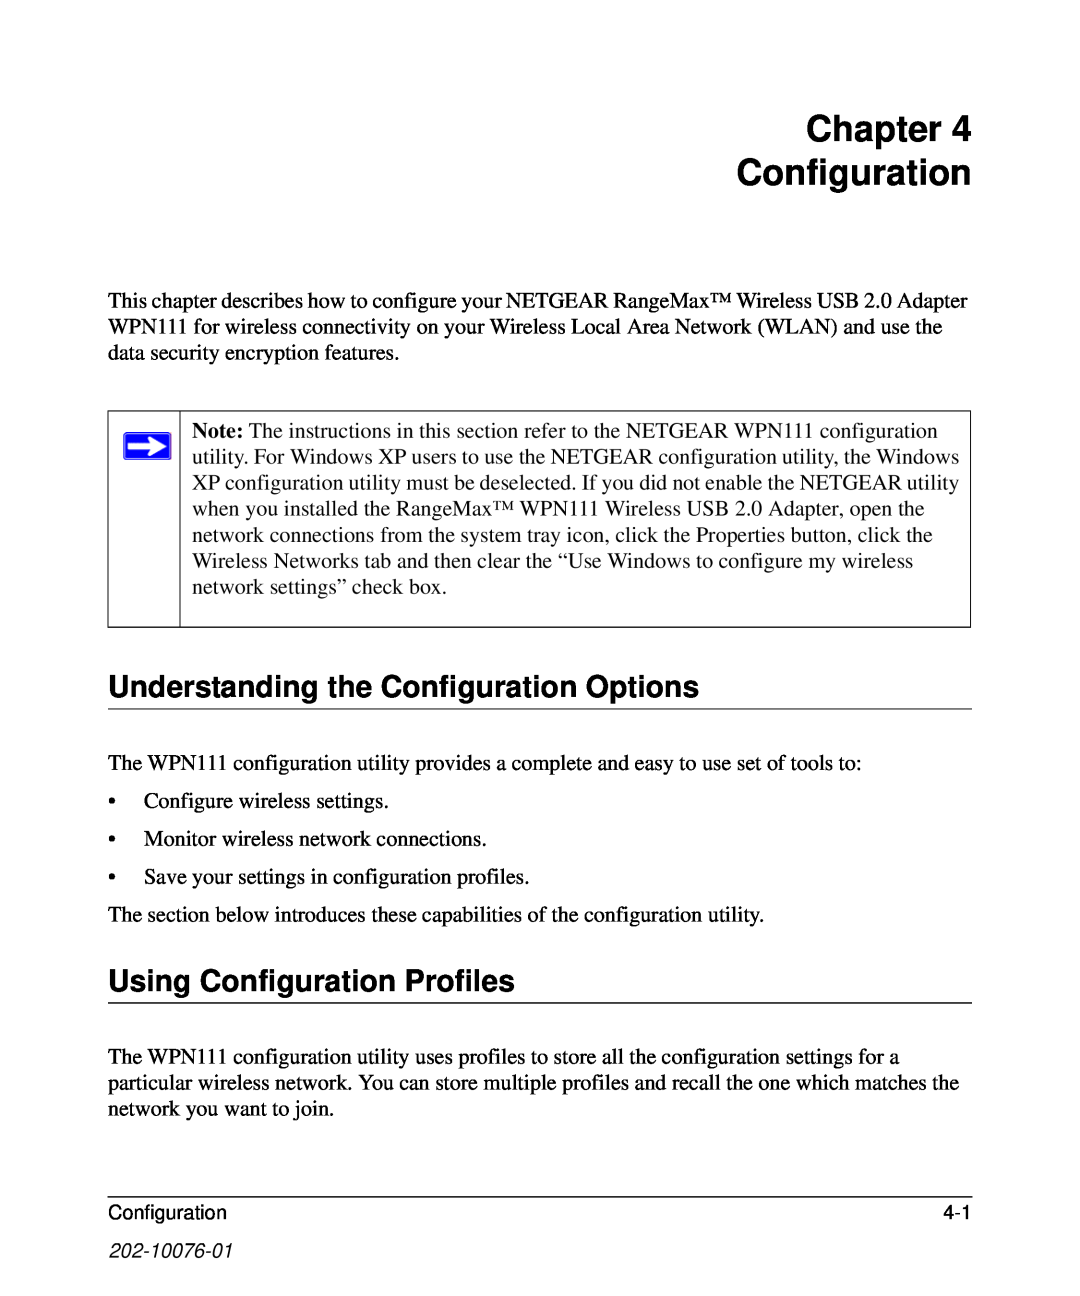 NETGEAR WPN111 user manual Chapter Configuration, Understanding the Configuration Options, Using Configuration Profiles 